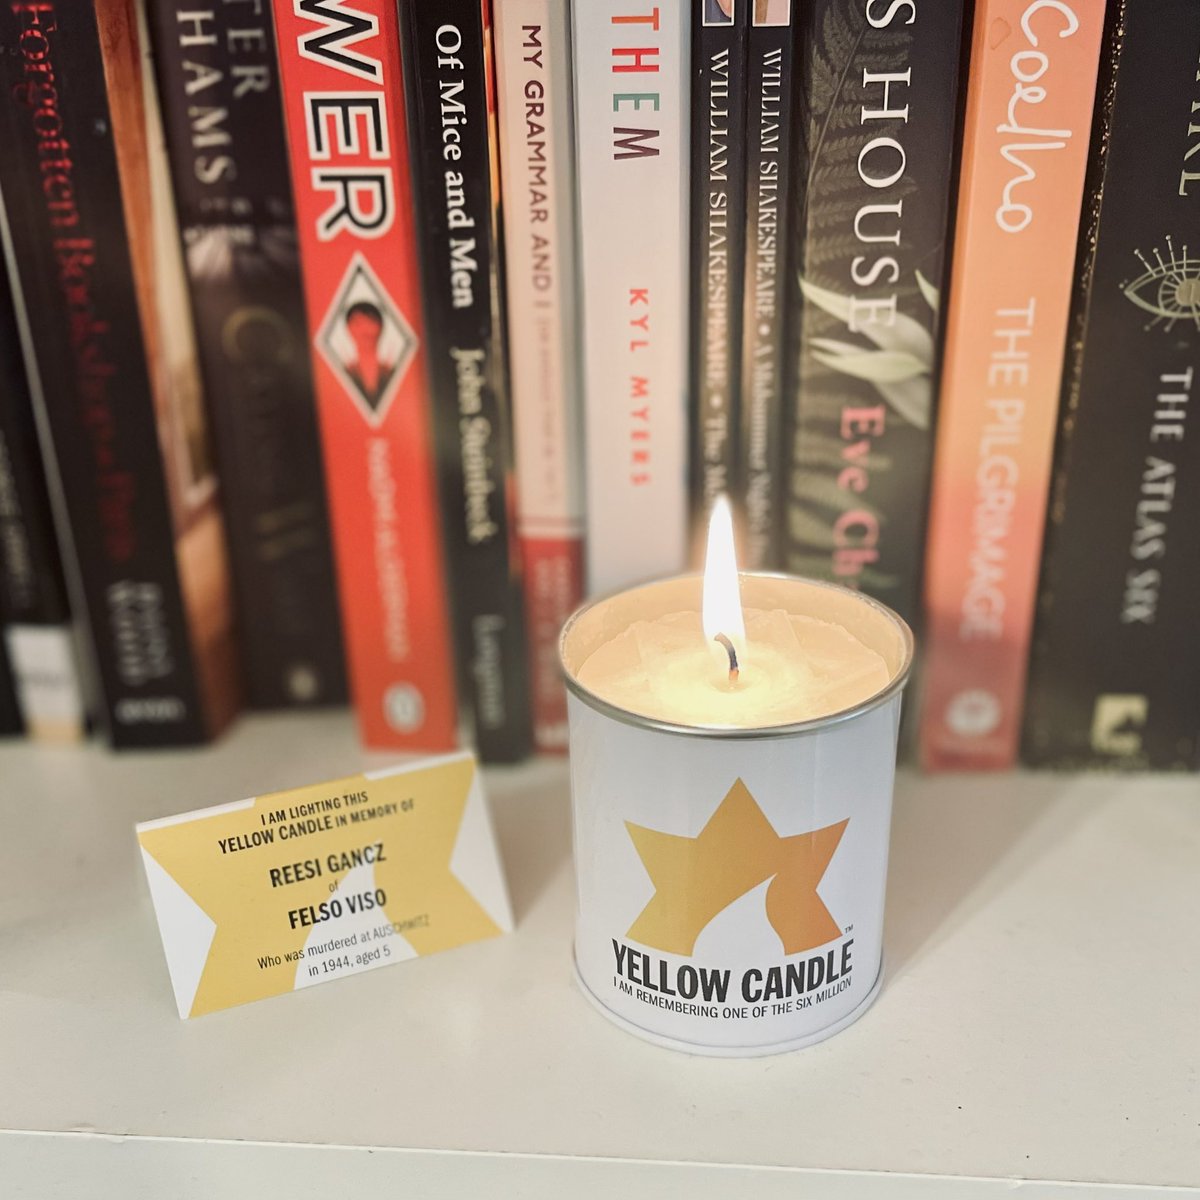 We are remembering Reesi Gancz, aged 4, who was murdered in Auschwitz. #yellowcandle #yomhashoah